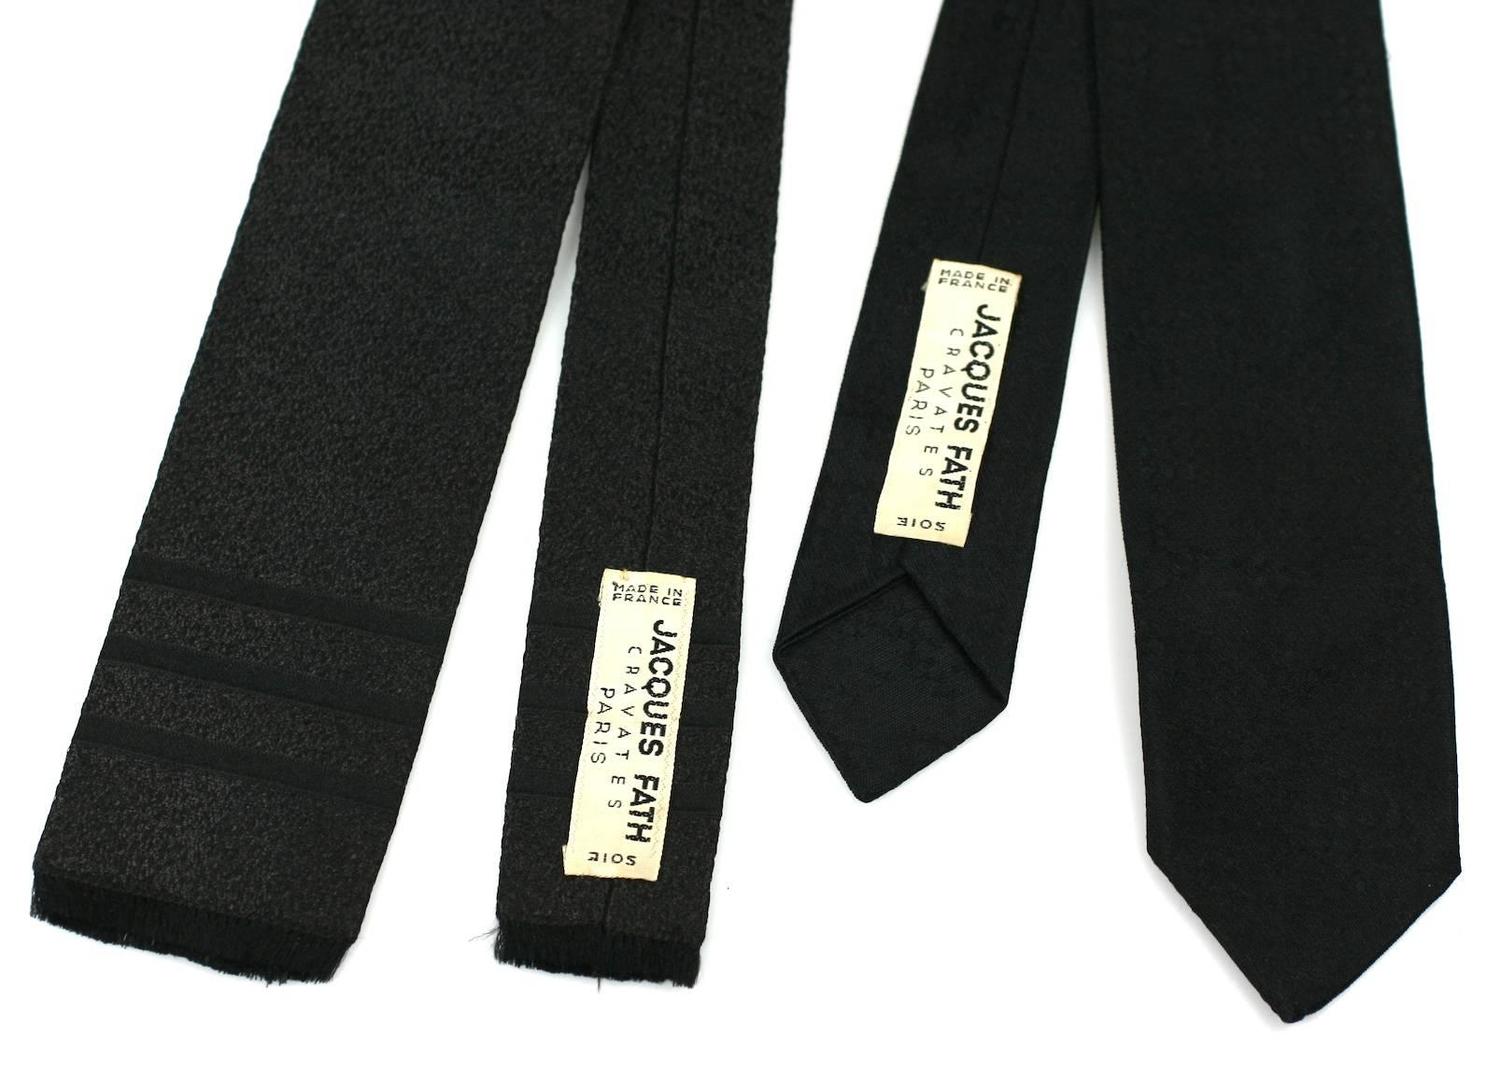 Pair of Jacques Fath Skinny Ties For Sale at 1stdibs